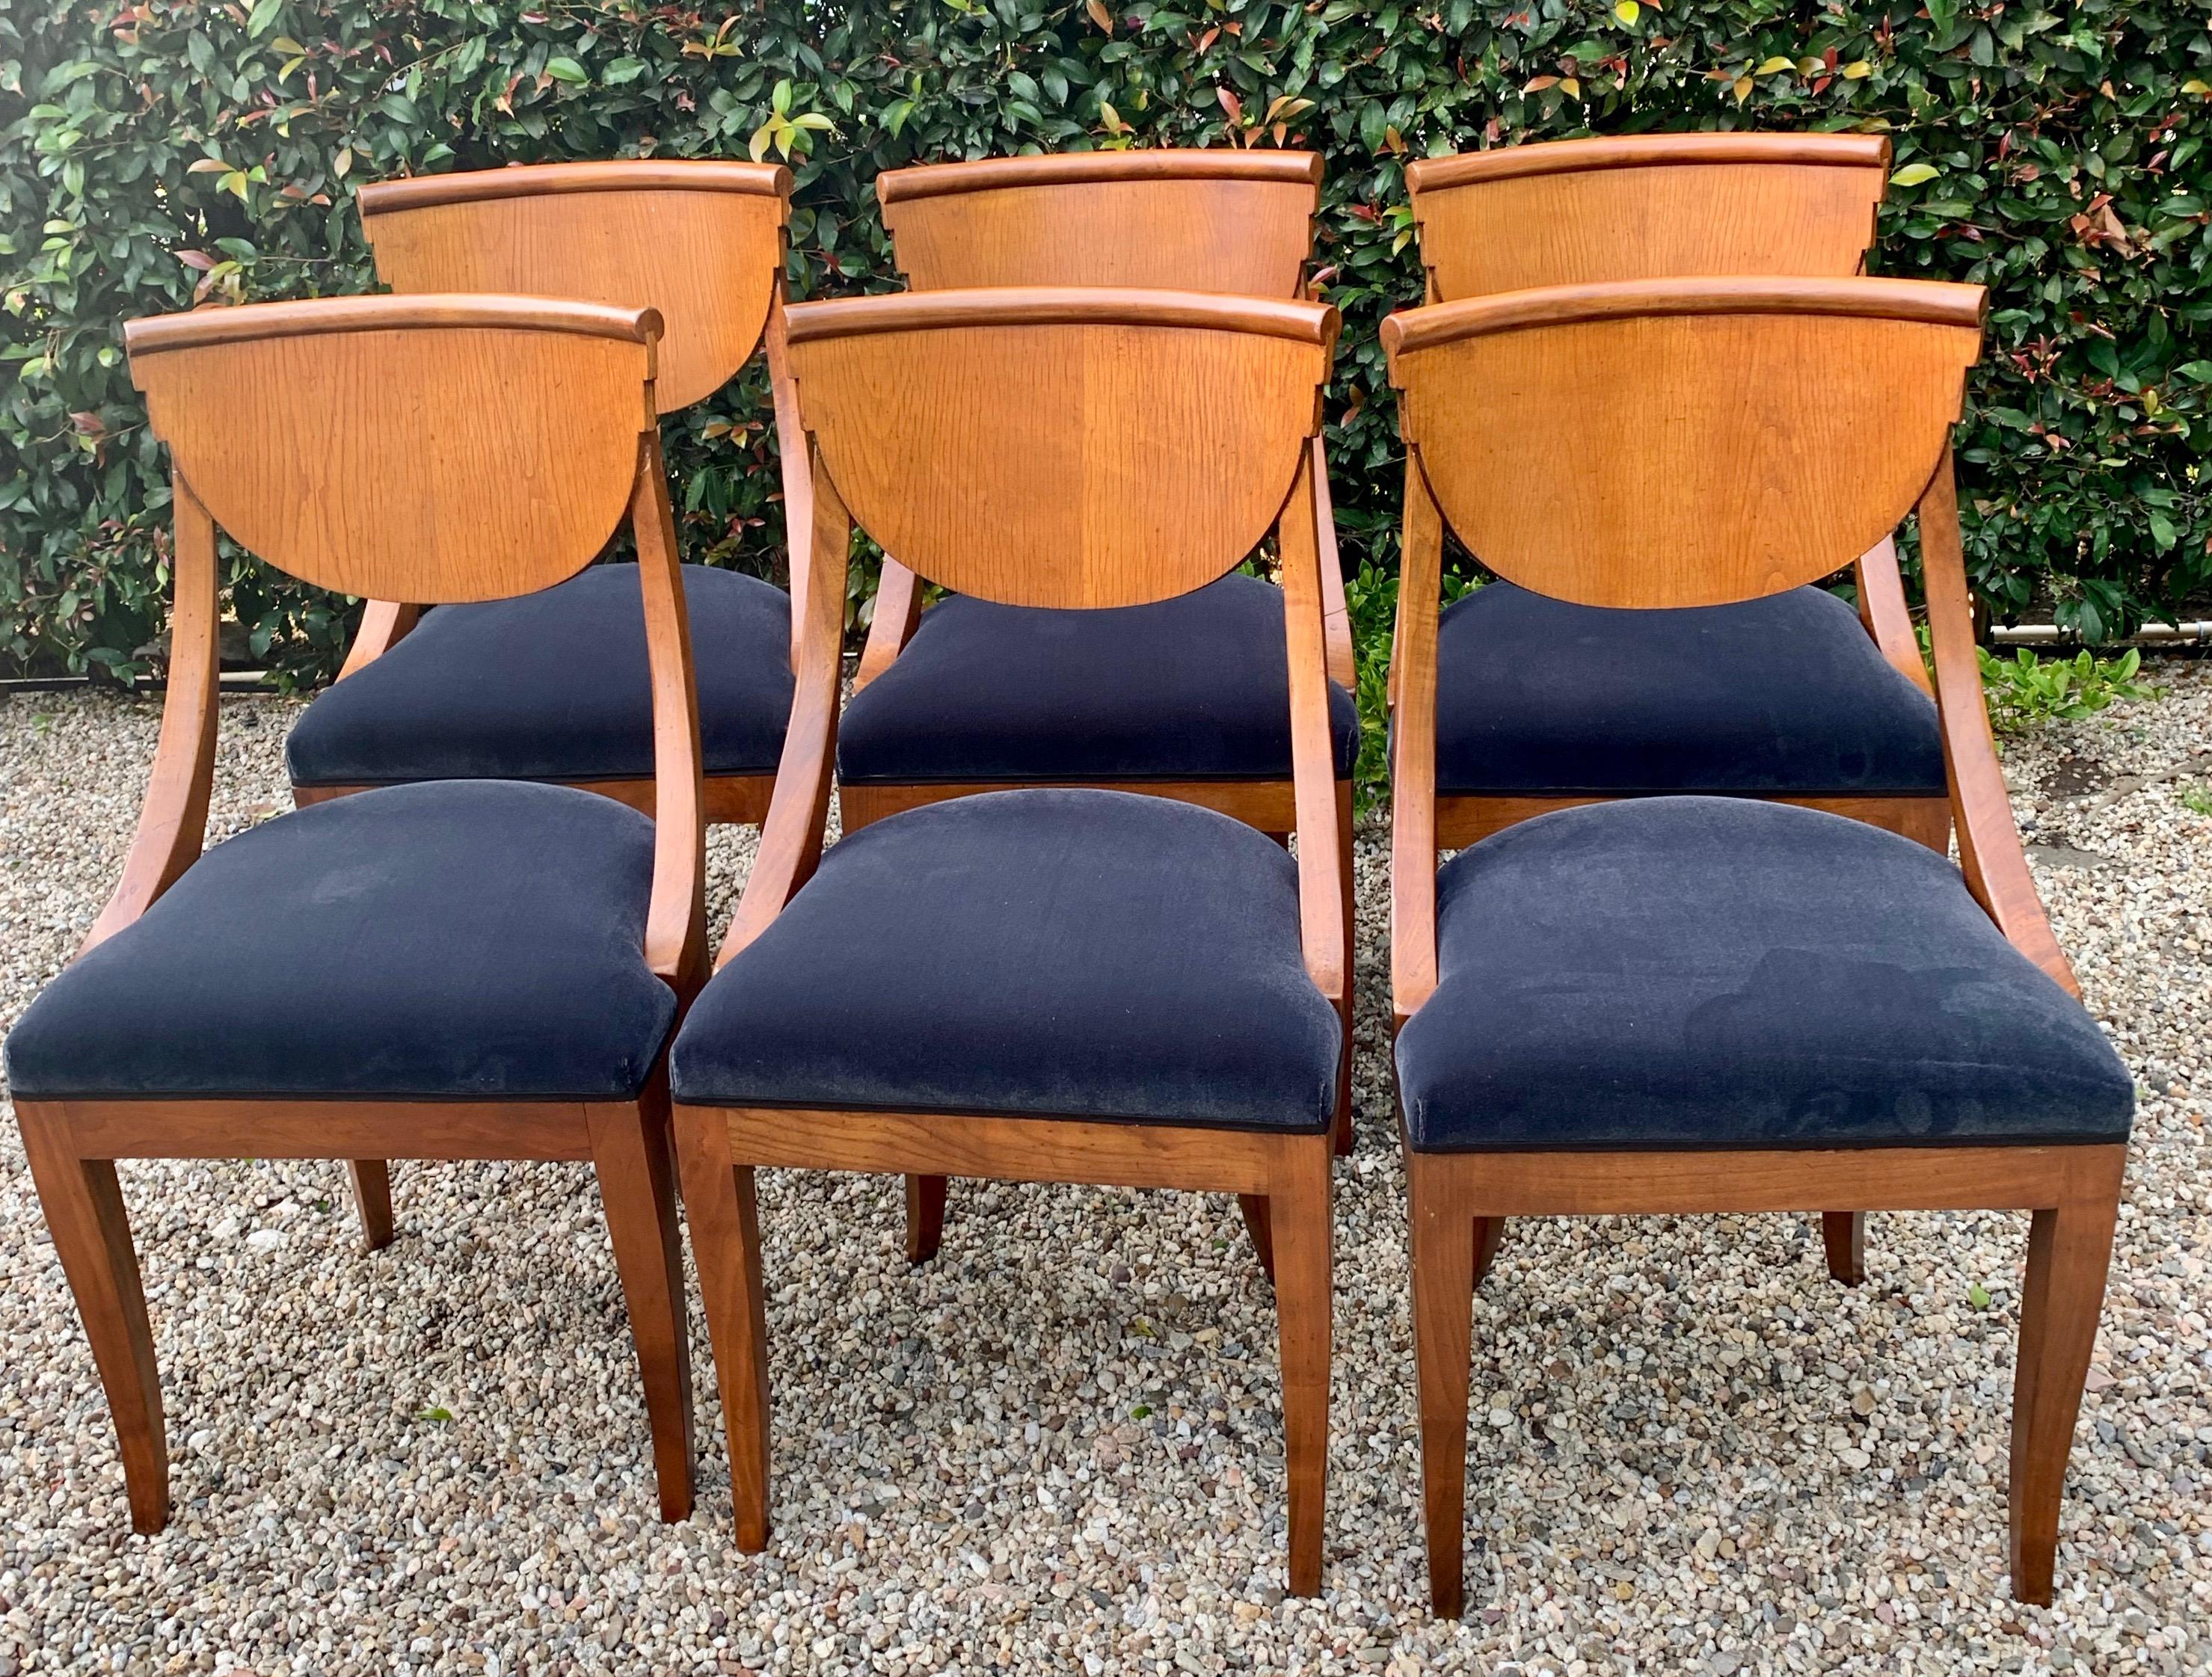 6 handsome satinwood maple deco dining chairs. Made in Italy and newly upholstered in a gray / blue Belgian velvet. We added a flat silk satin tuxedo ribbon, taking them from elegant and sophisticated too formal. Wonderful compliment to most dining